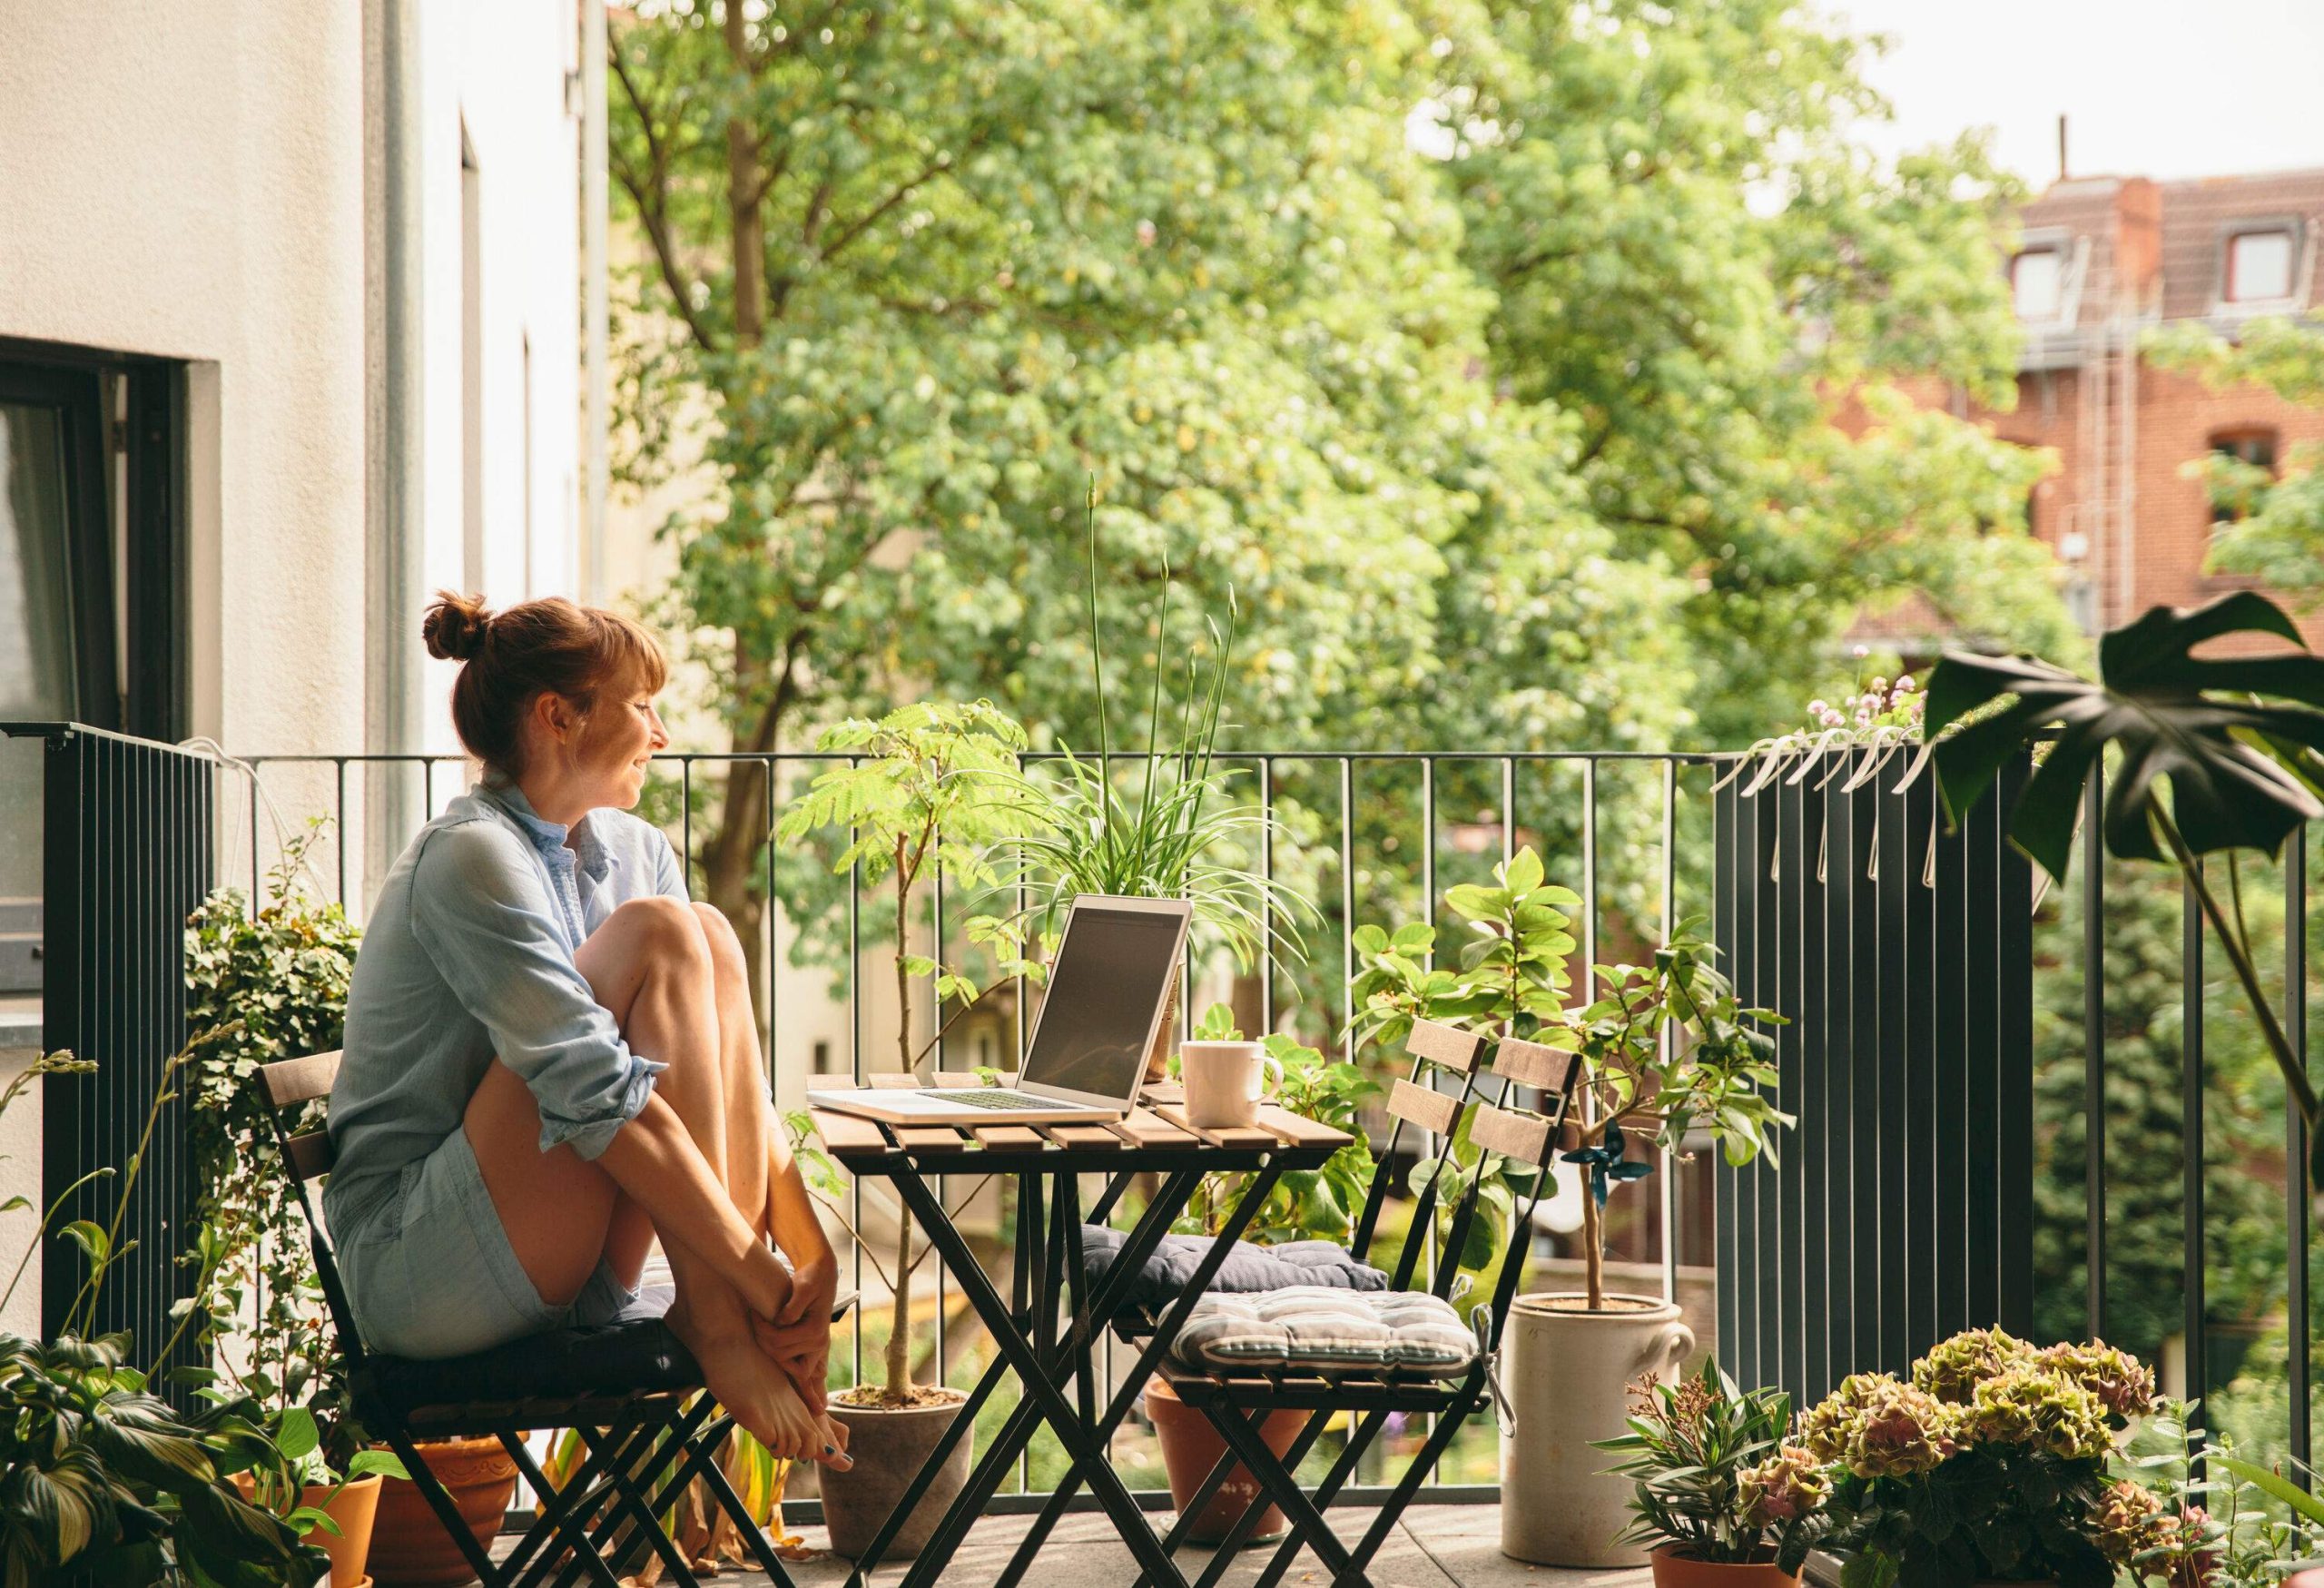 A woman sitting in a garden chair with her feet up, smiling as she watches something on her laptop.